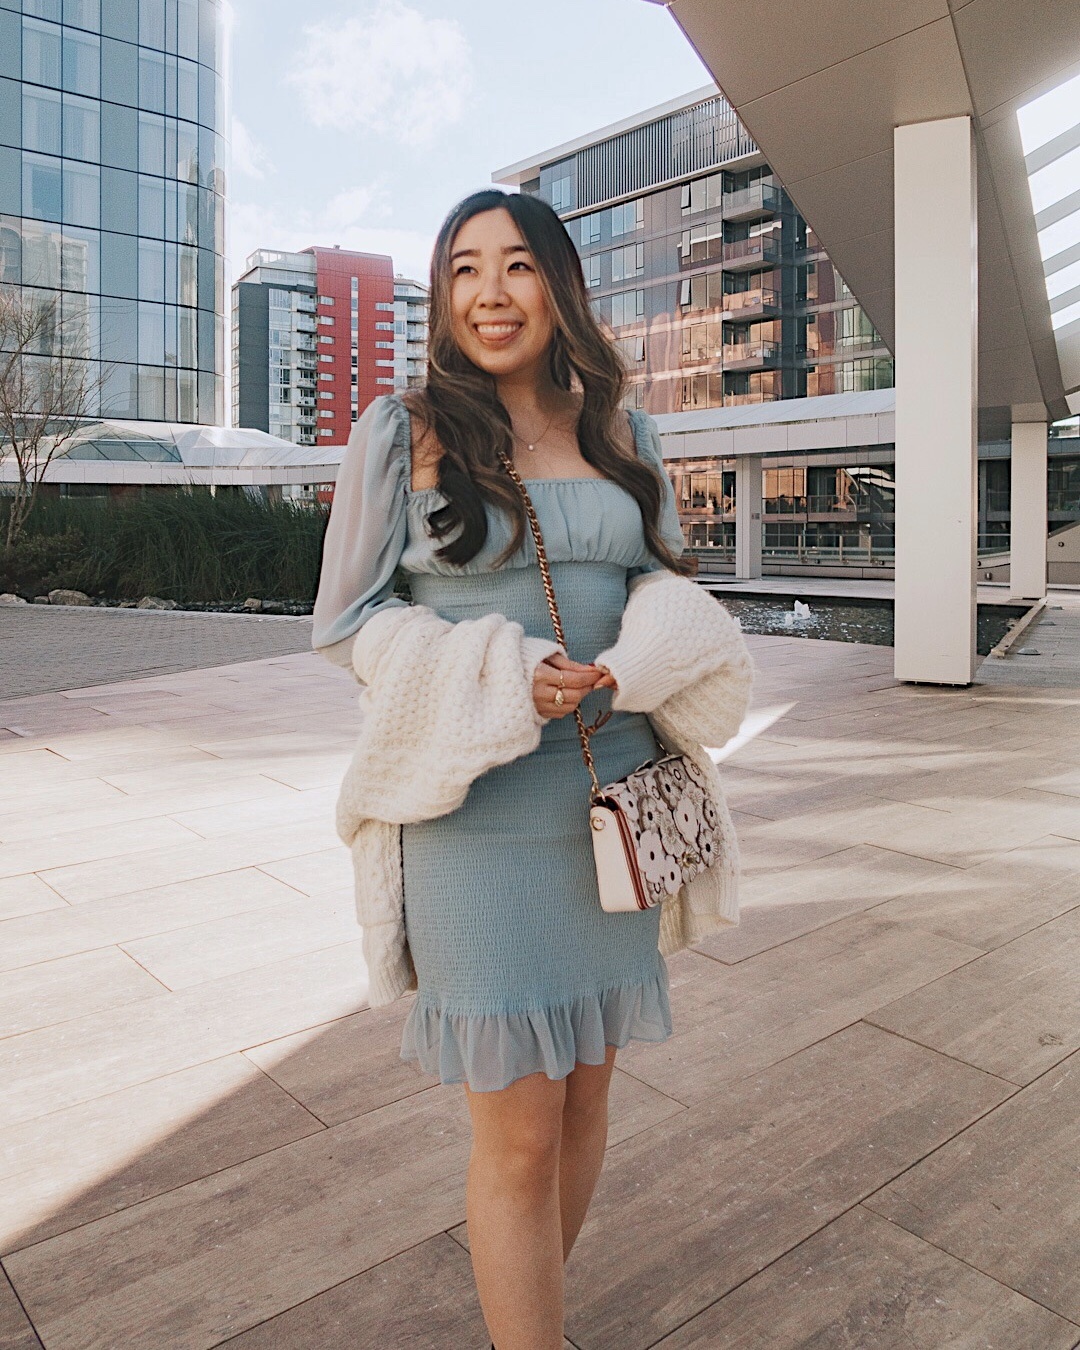 Enjoying a crisp spring day with my favourite turquoise dress, cozy knit cardigan and floral bag